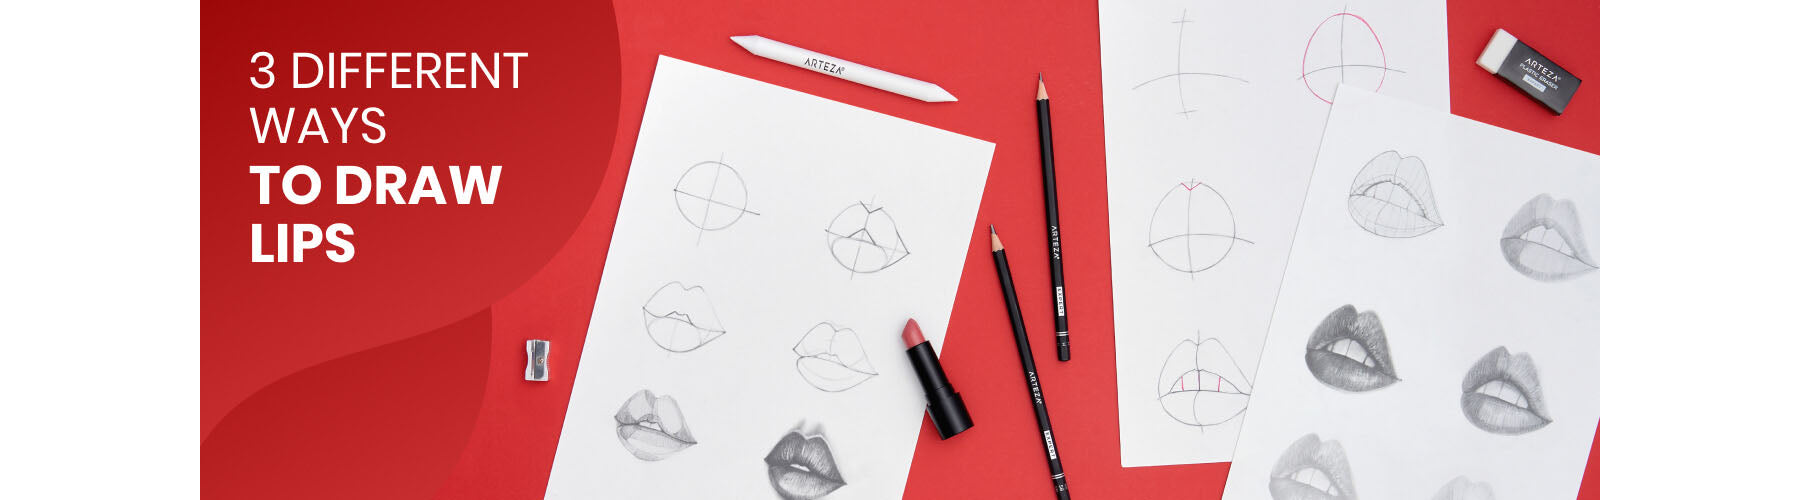 How to Draw Realistic Lips Step-by-Step in 3 Different Ways